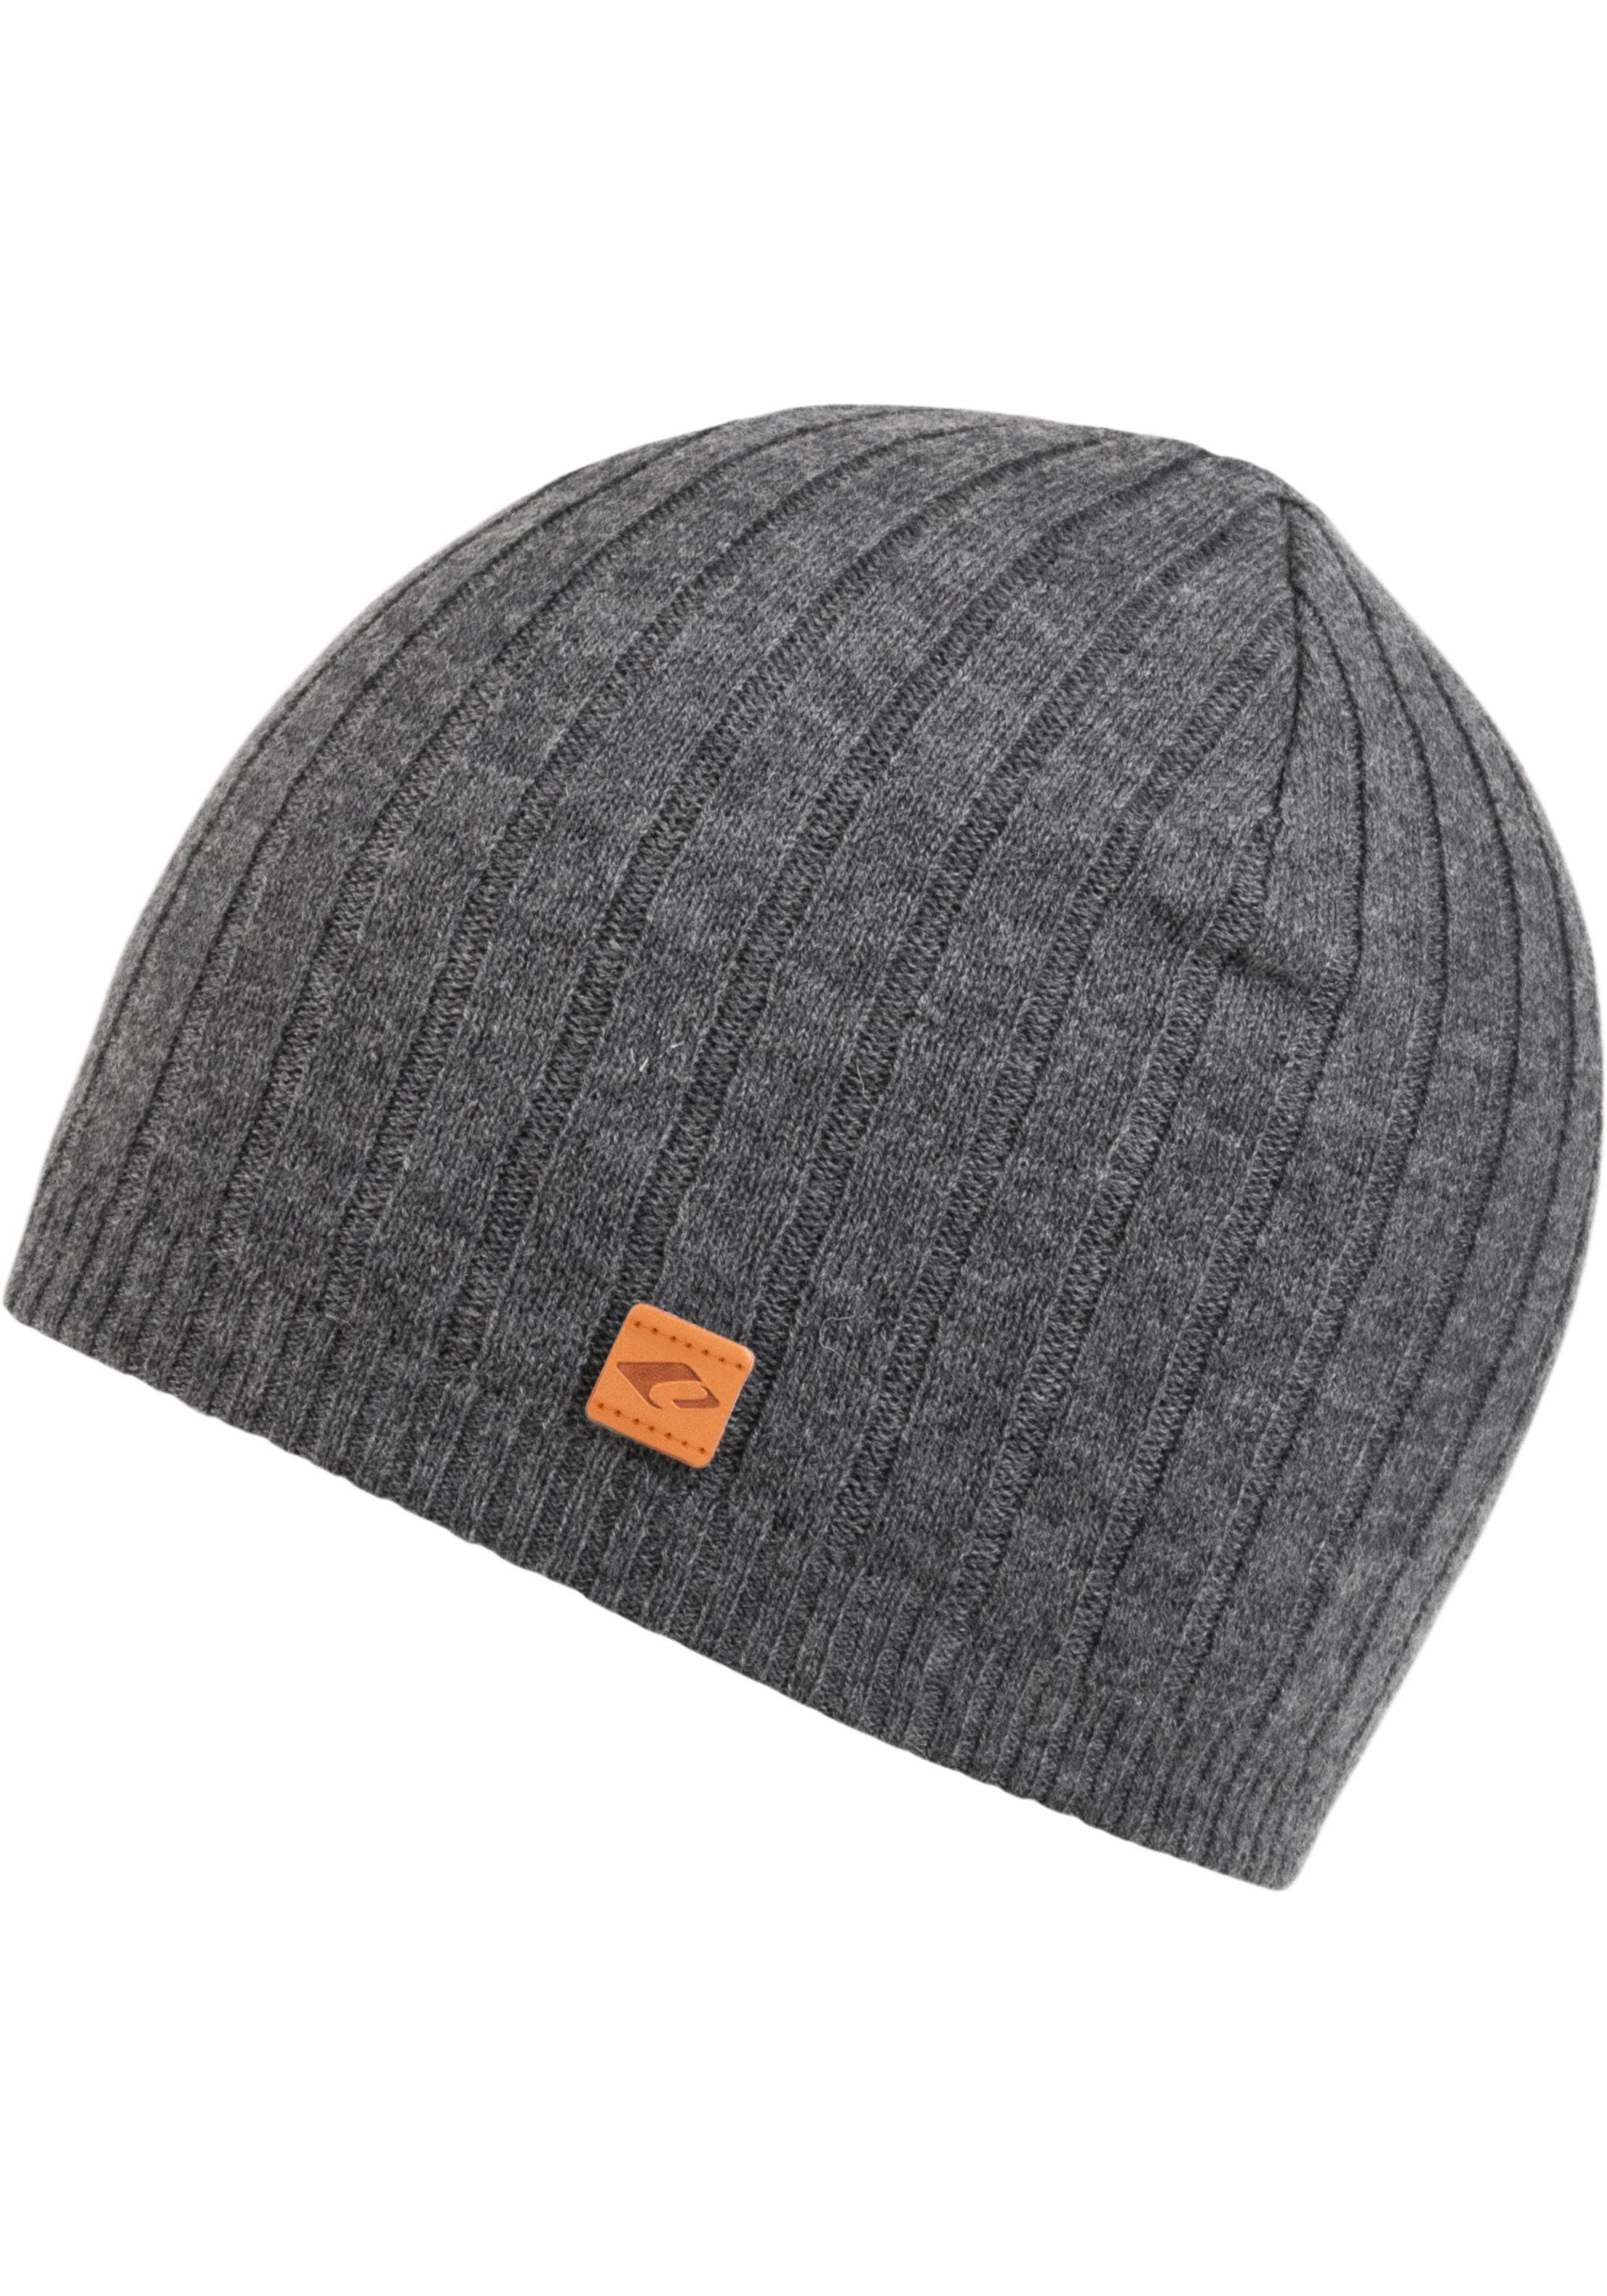 warm Alfred chillouts Doppellagig, Beanie grey Hat angenehm melange